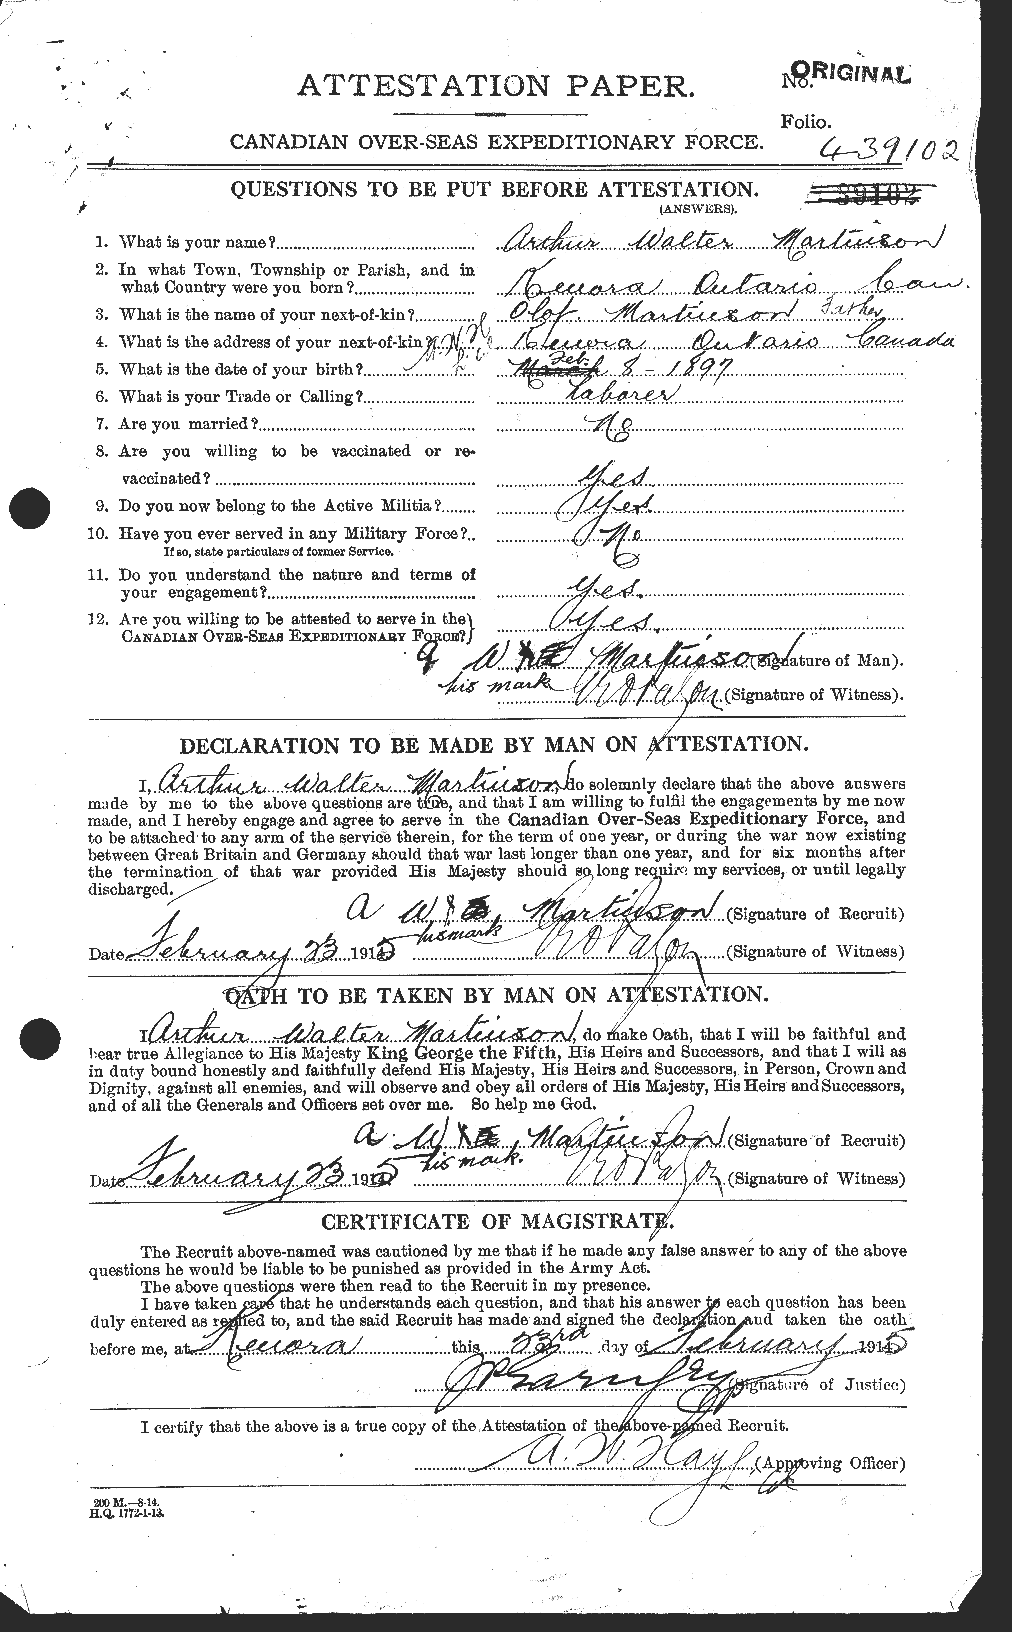 Personnel Records of the First World War - CEF 486009a